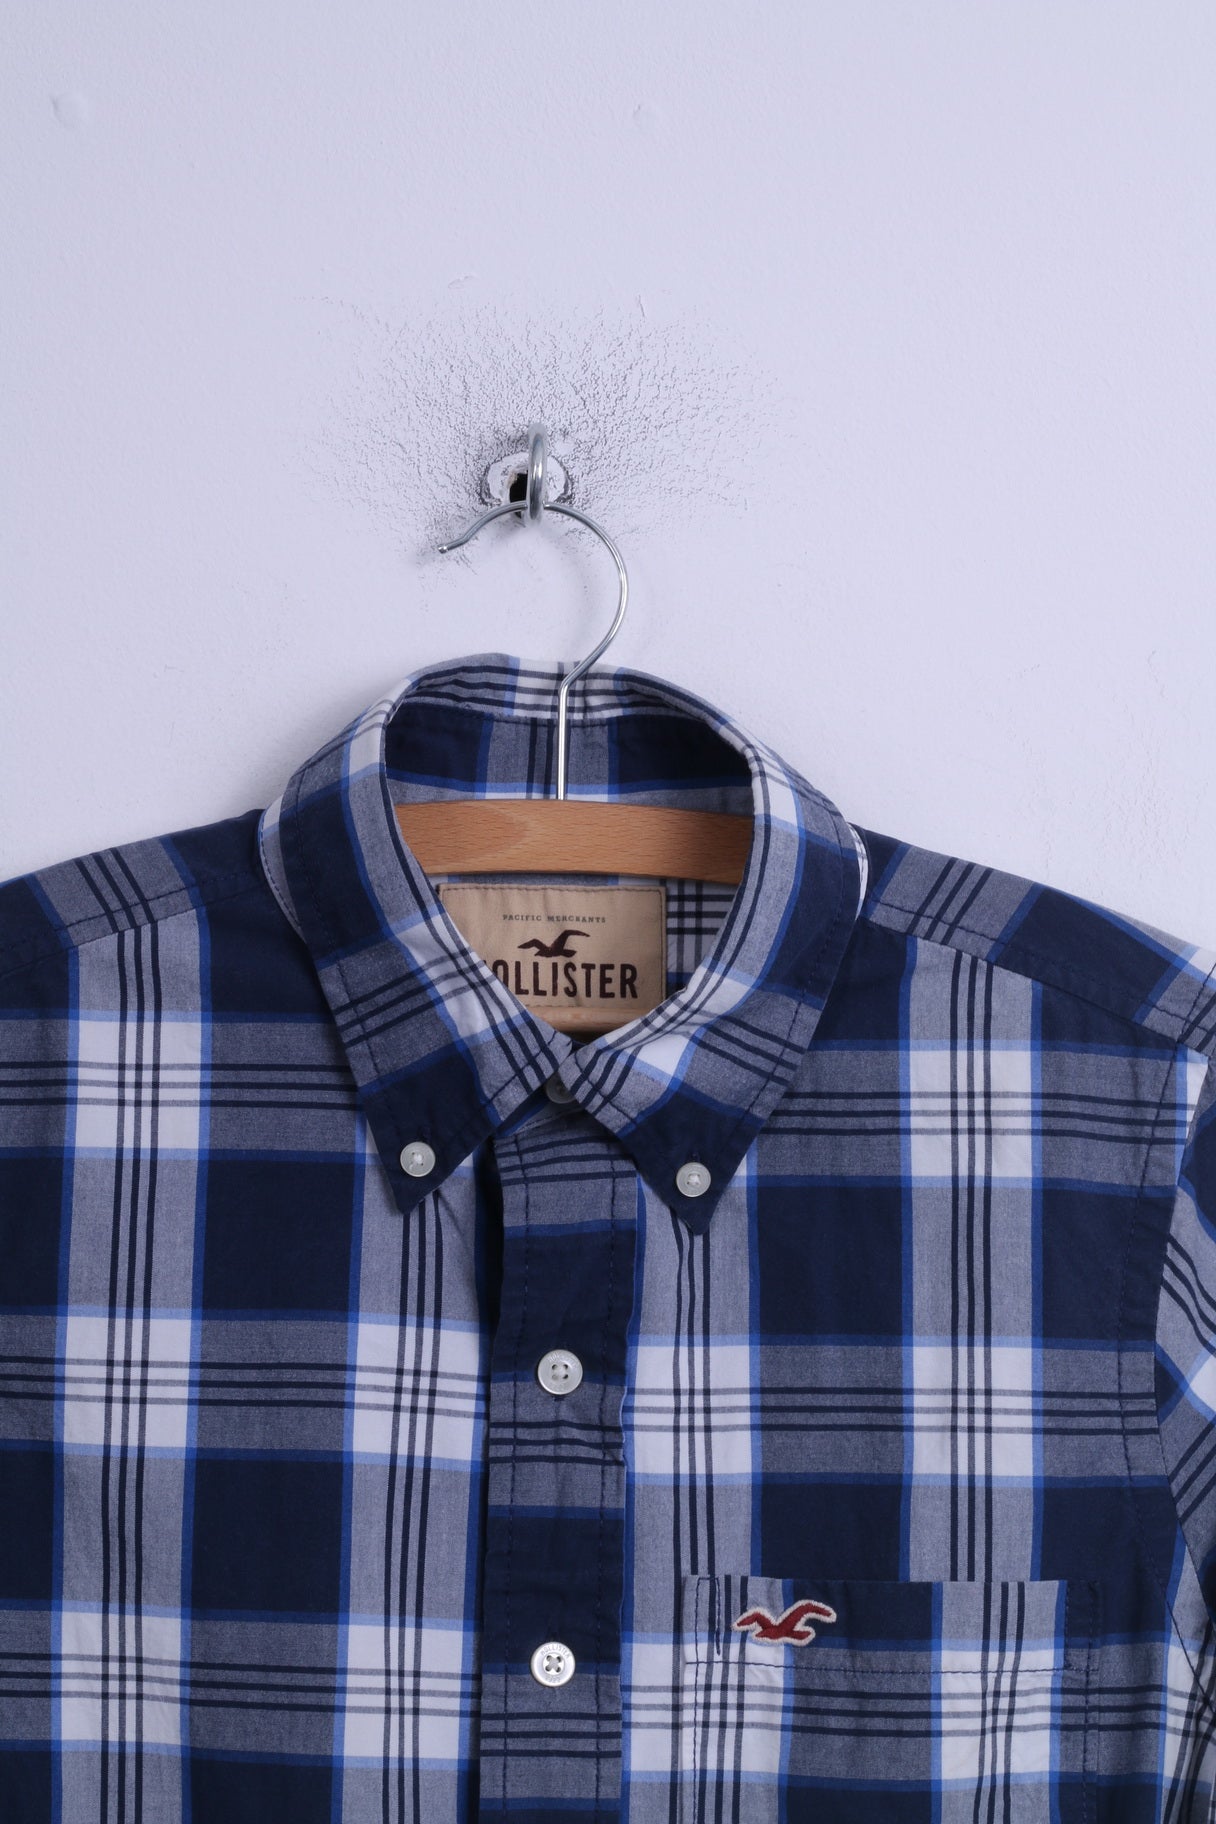 Hollister Button Down Pin Striped Shirt XS Blue - $10 - From